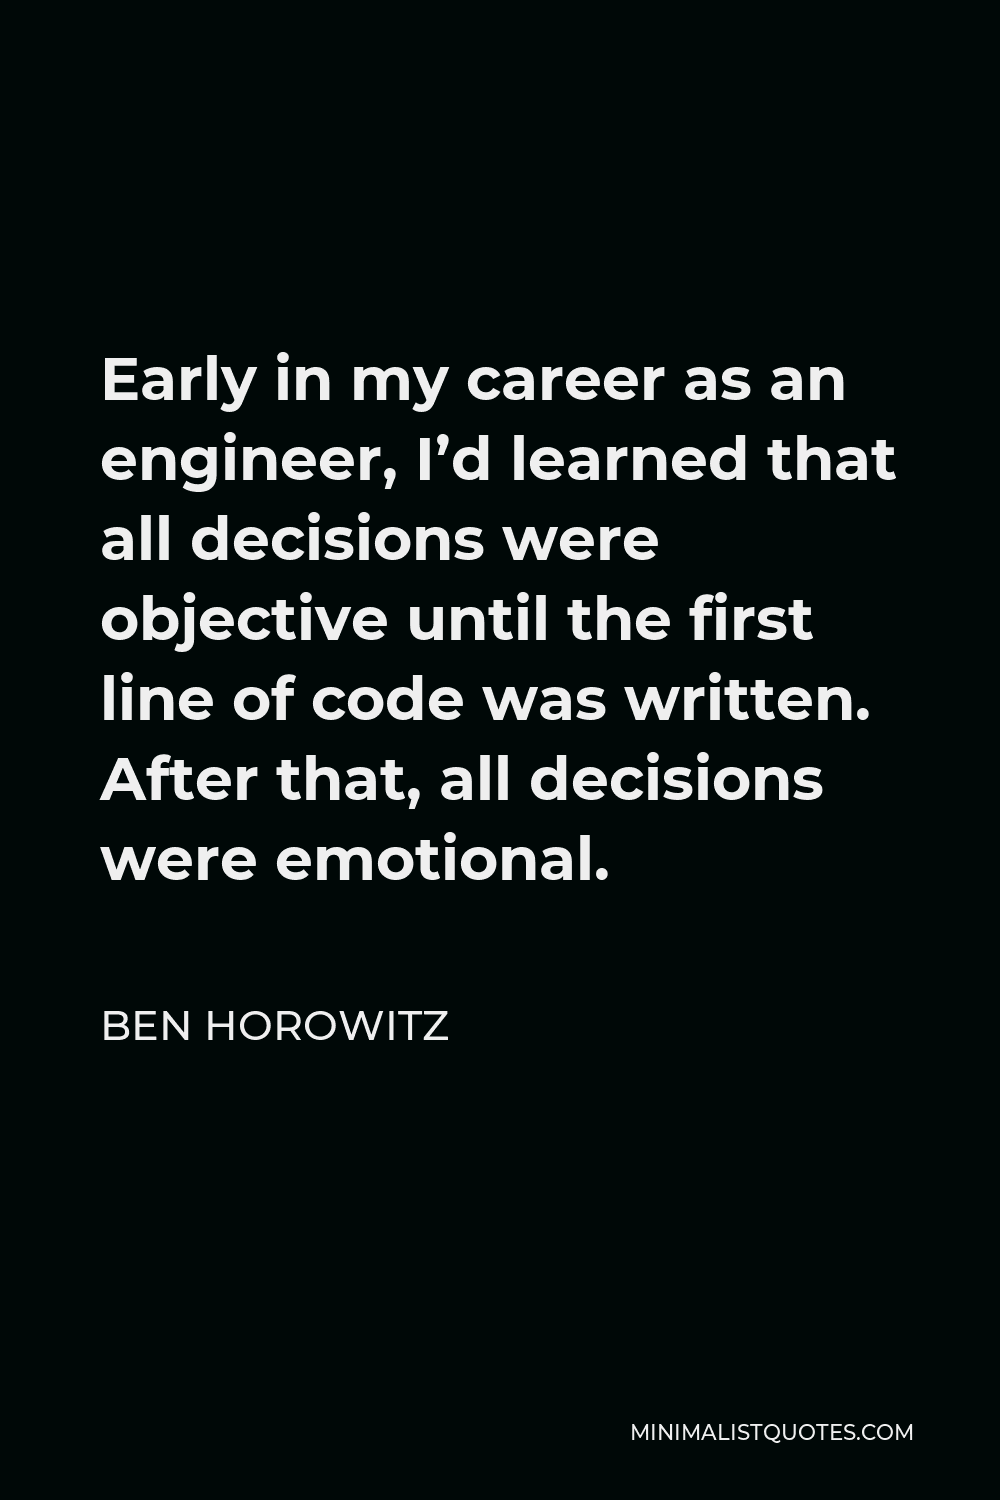 Ben Horowitz Quote - Early in my career as an engineer, I’d learned that all decisions were objective until the first line of code was written. After that, all decisions were emotional.